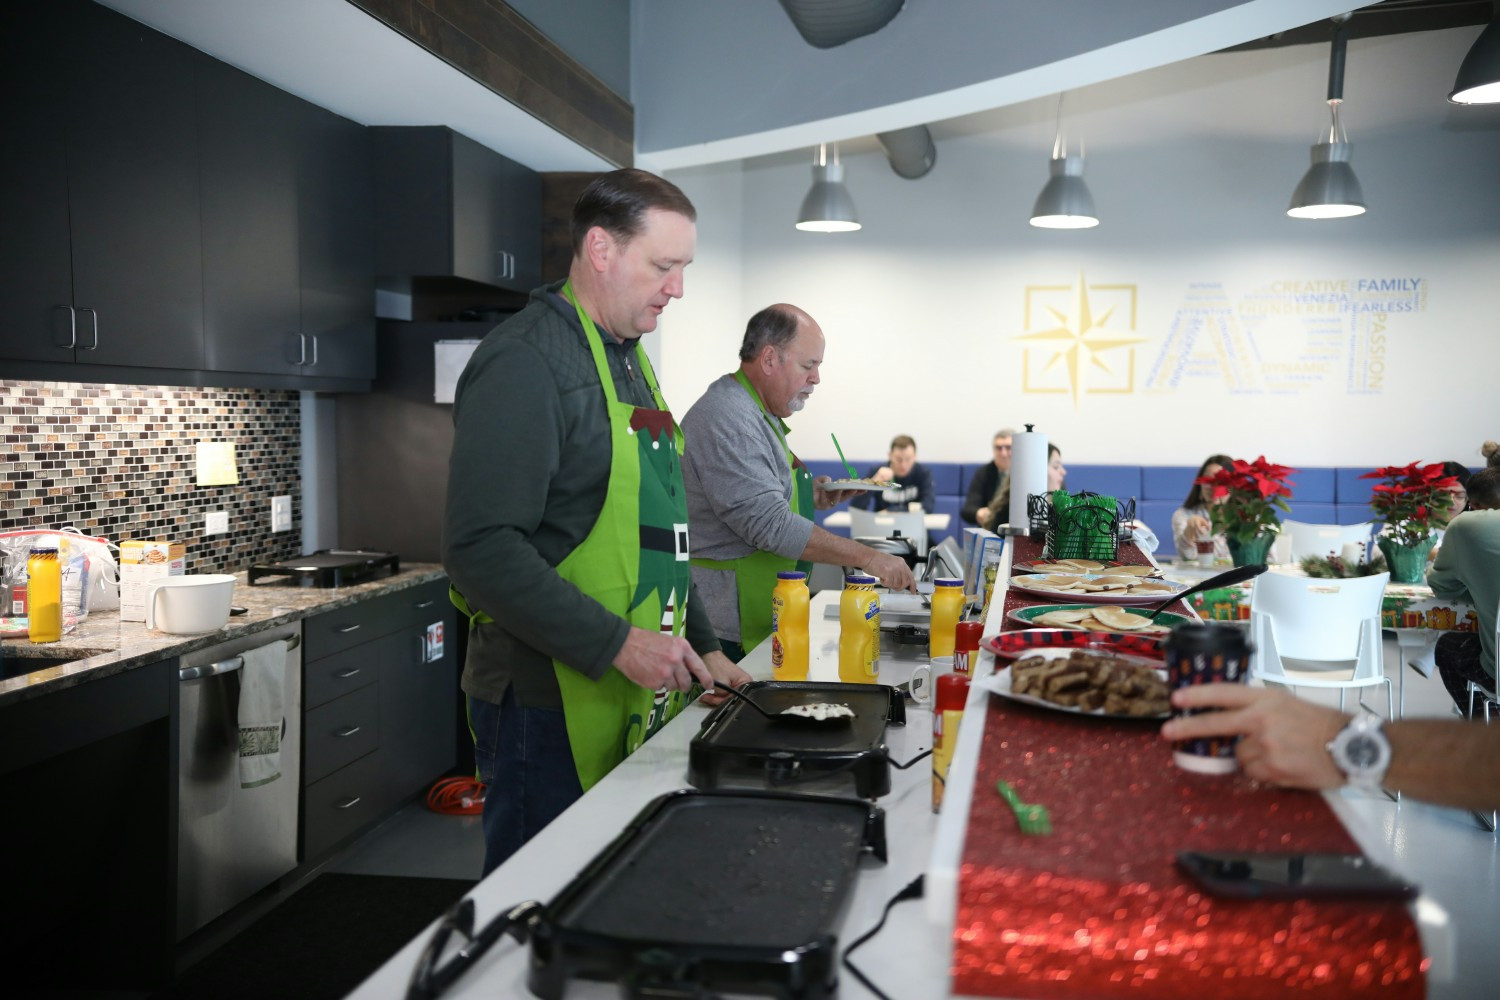 AOT celebrates an annual Pancake Breakfast in December. Senior leaders prepare breakfast for the whole team to enjoy!